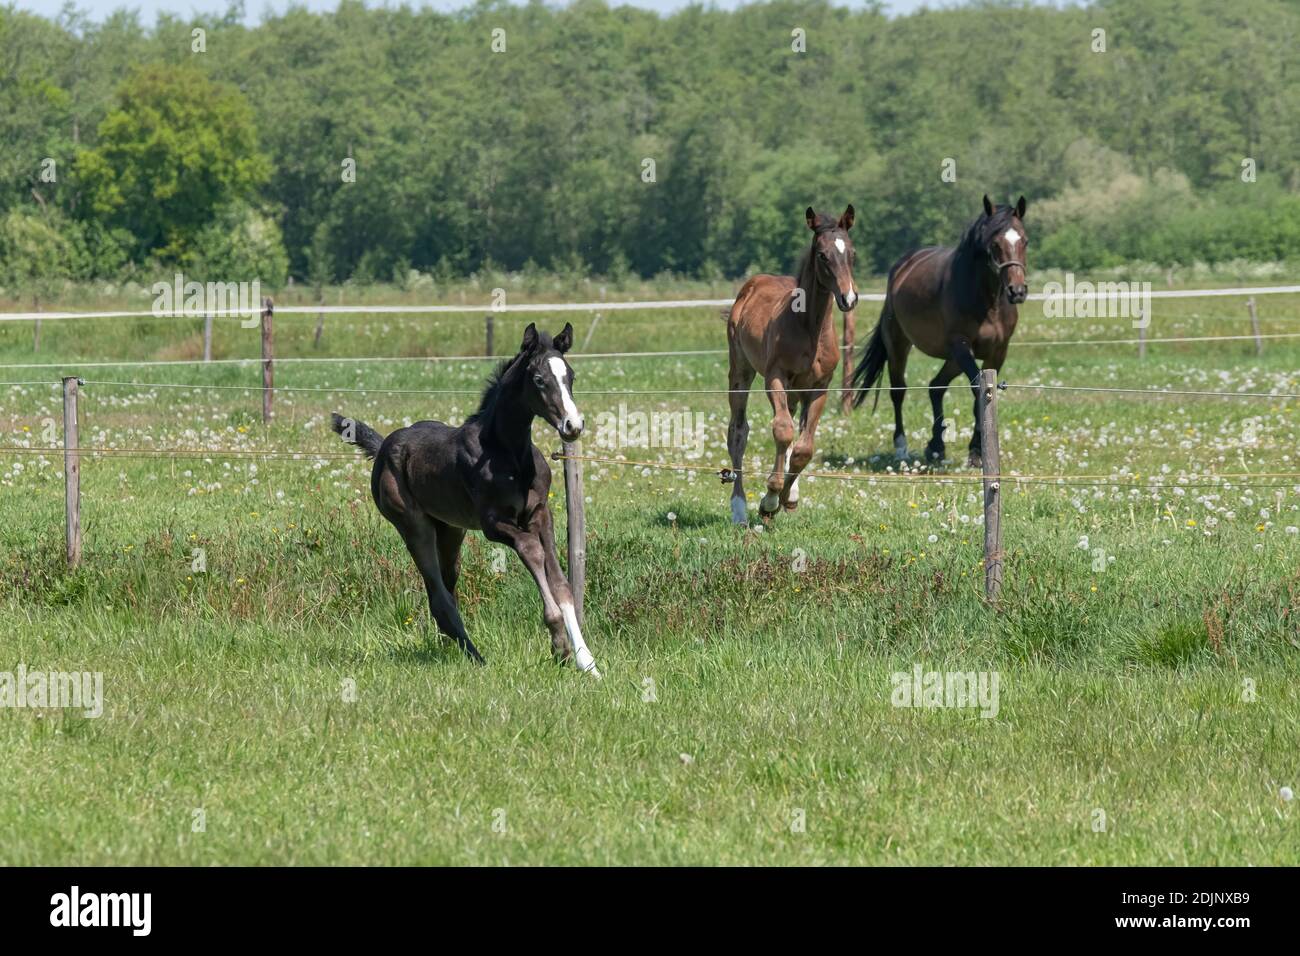 A black foal is trotting in the pasture. Horses gallop in background. Stock Photo